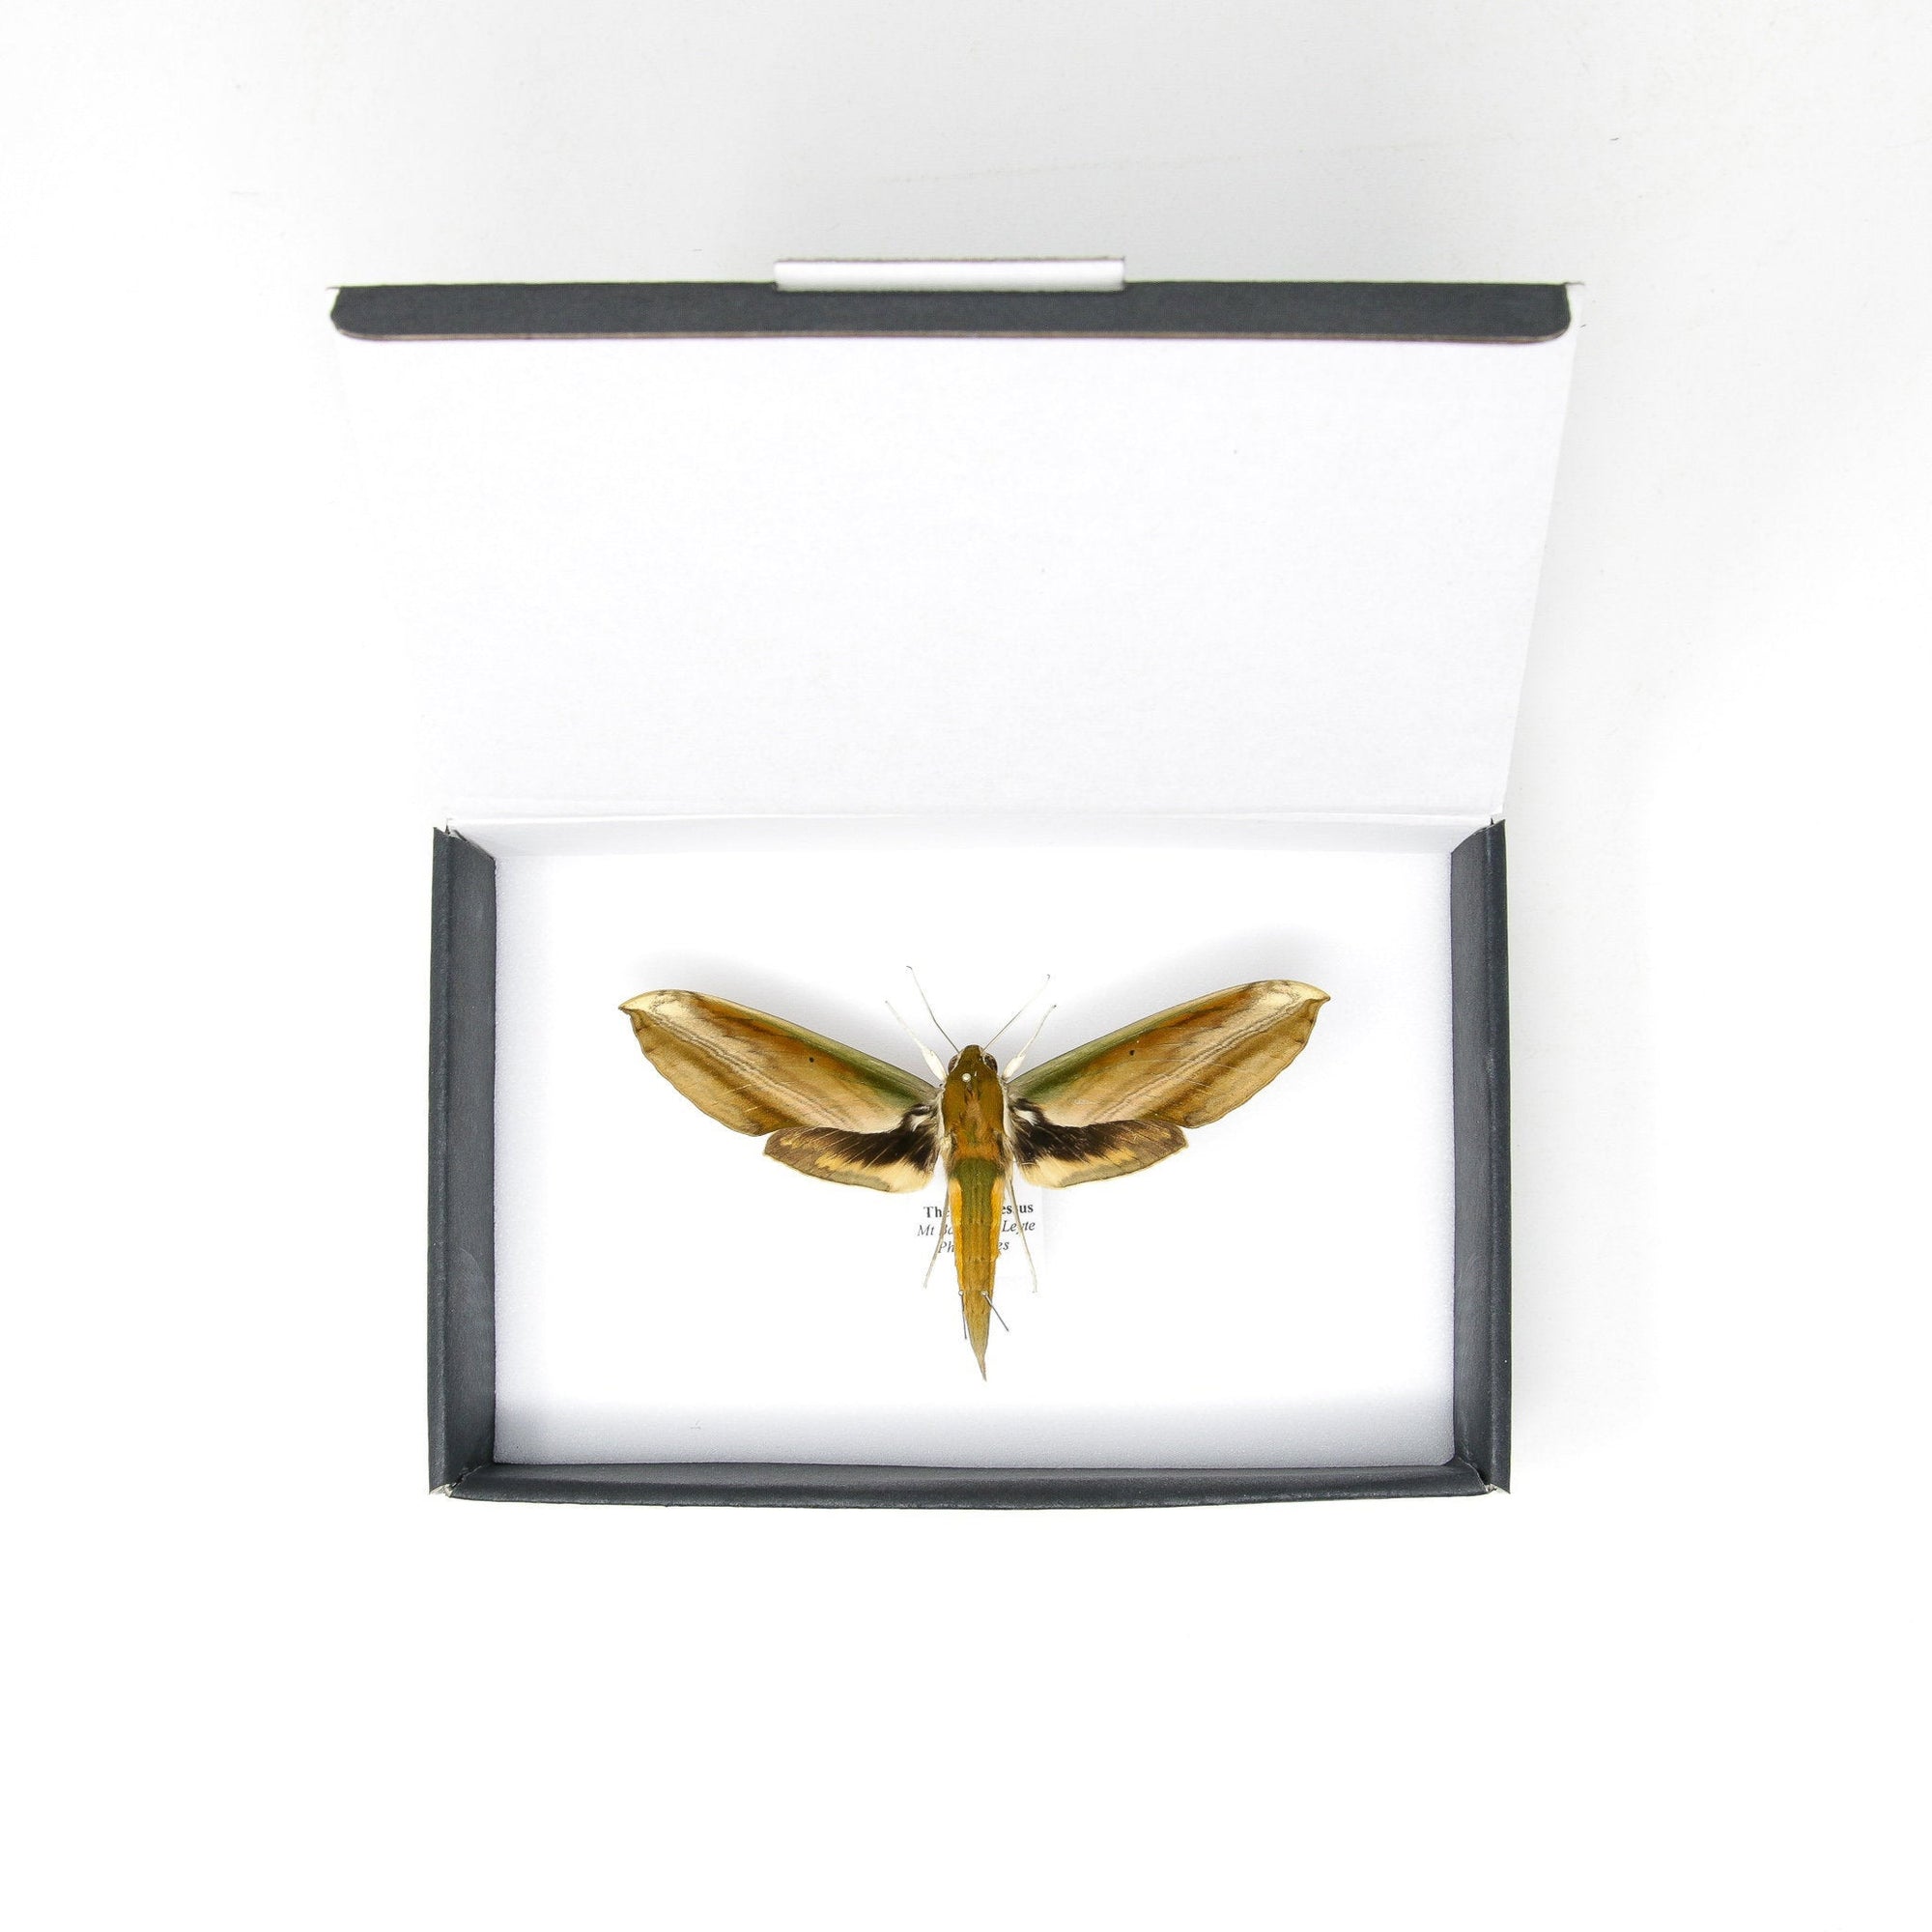 1 x Theretra nessus | The Yam Hawkmoth | A1 Pinned Specimen